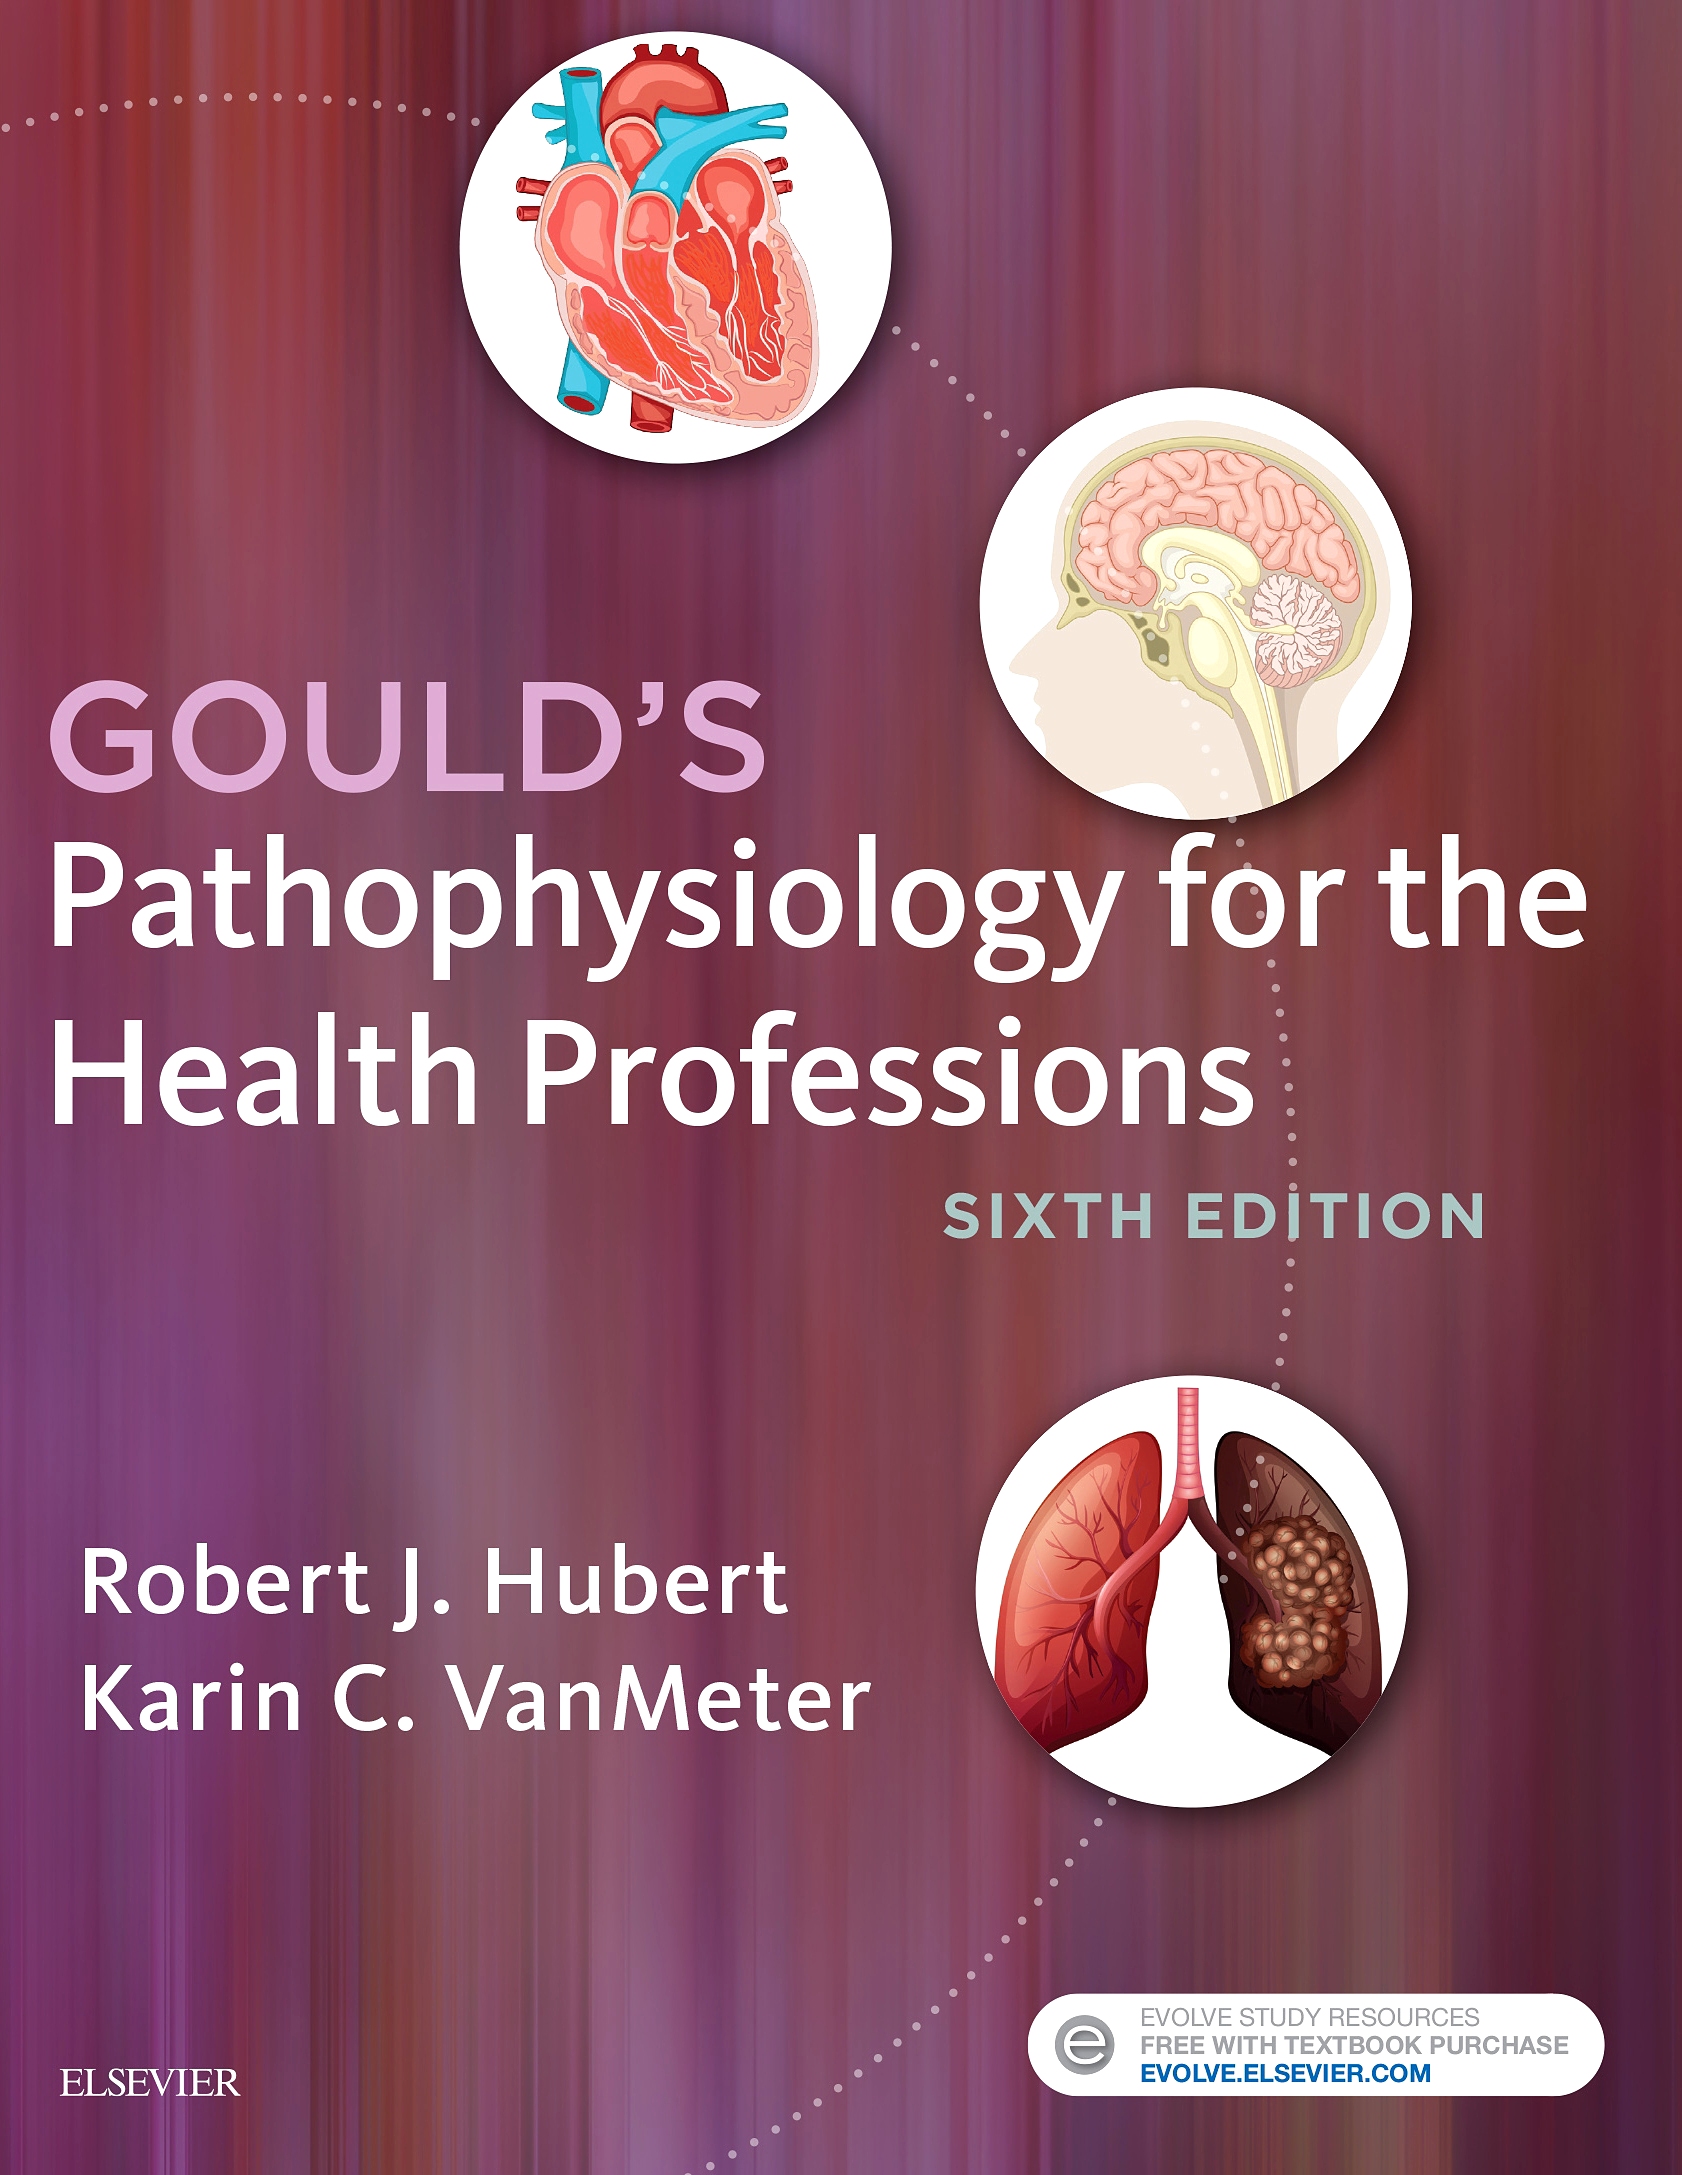 Pathophysiology Online for Gould's Pathophysiology for the Health Professions, 6th